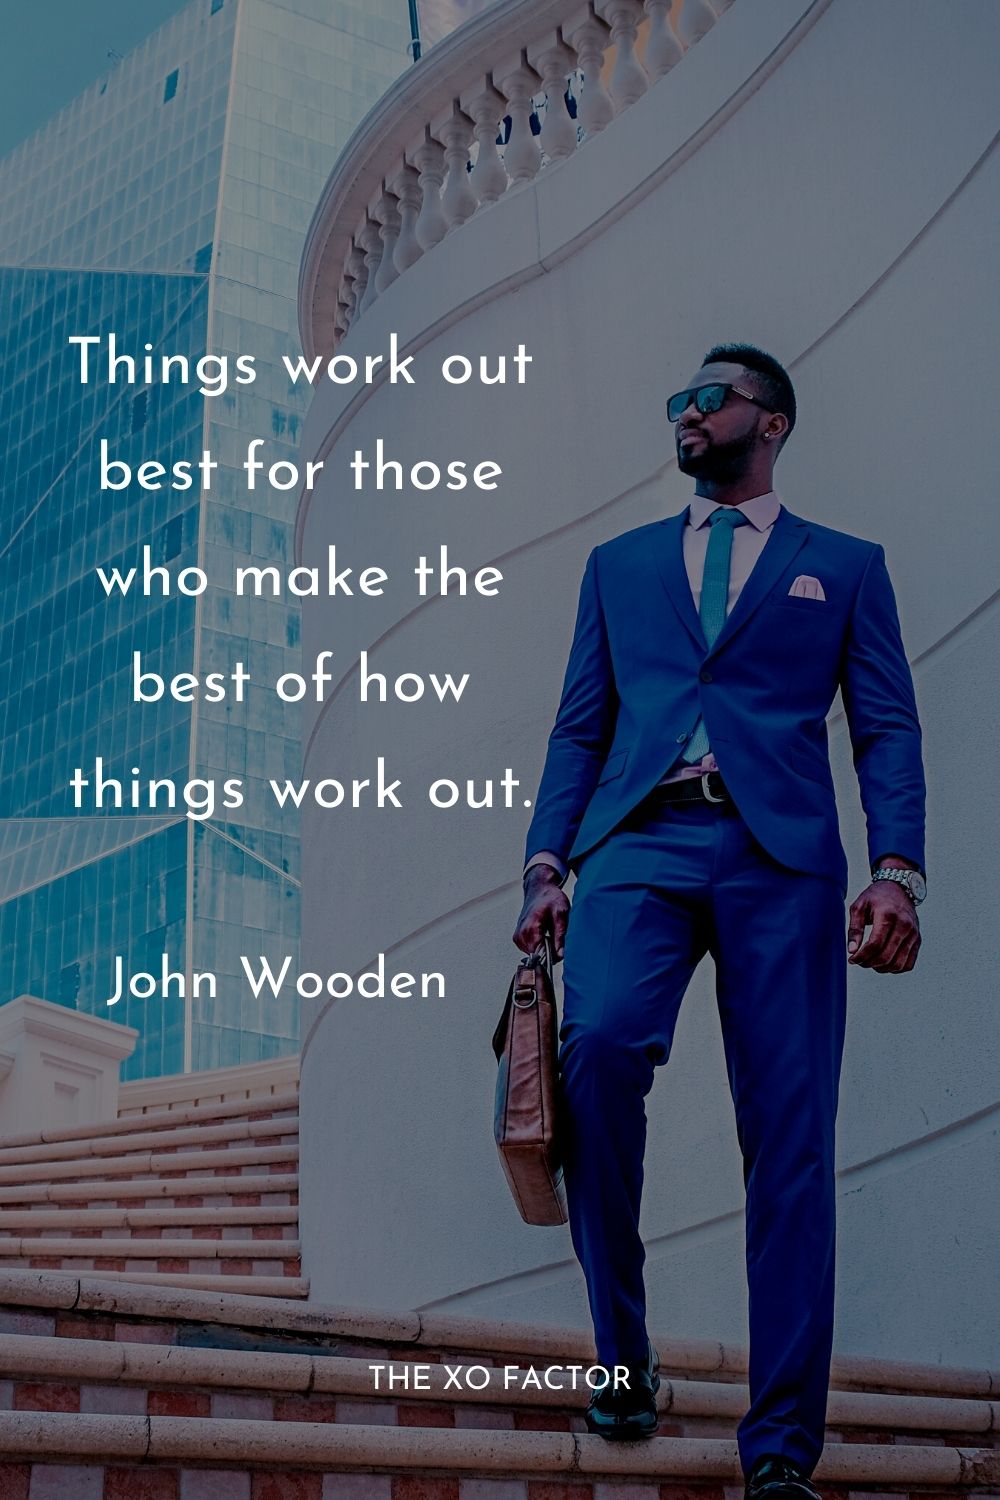 Things work out best for those who make the best of how things work out. John Wooden